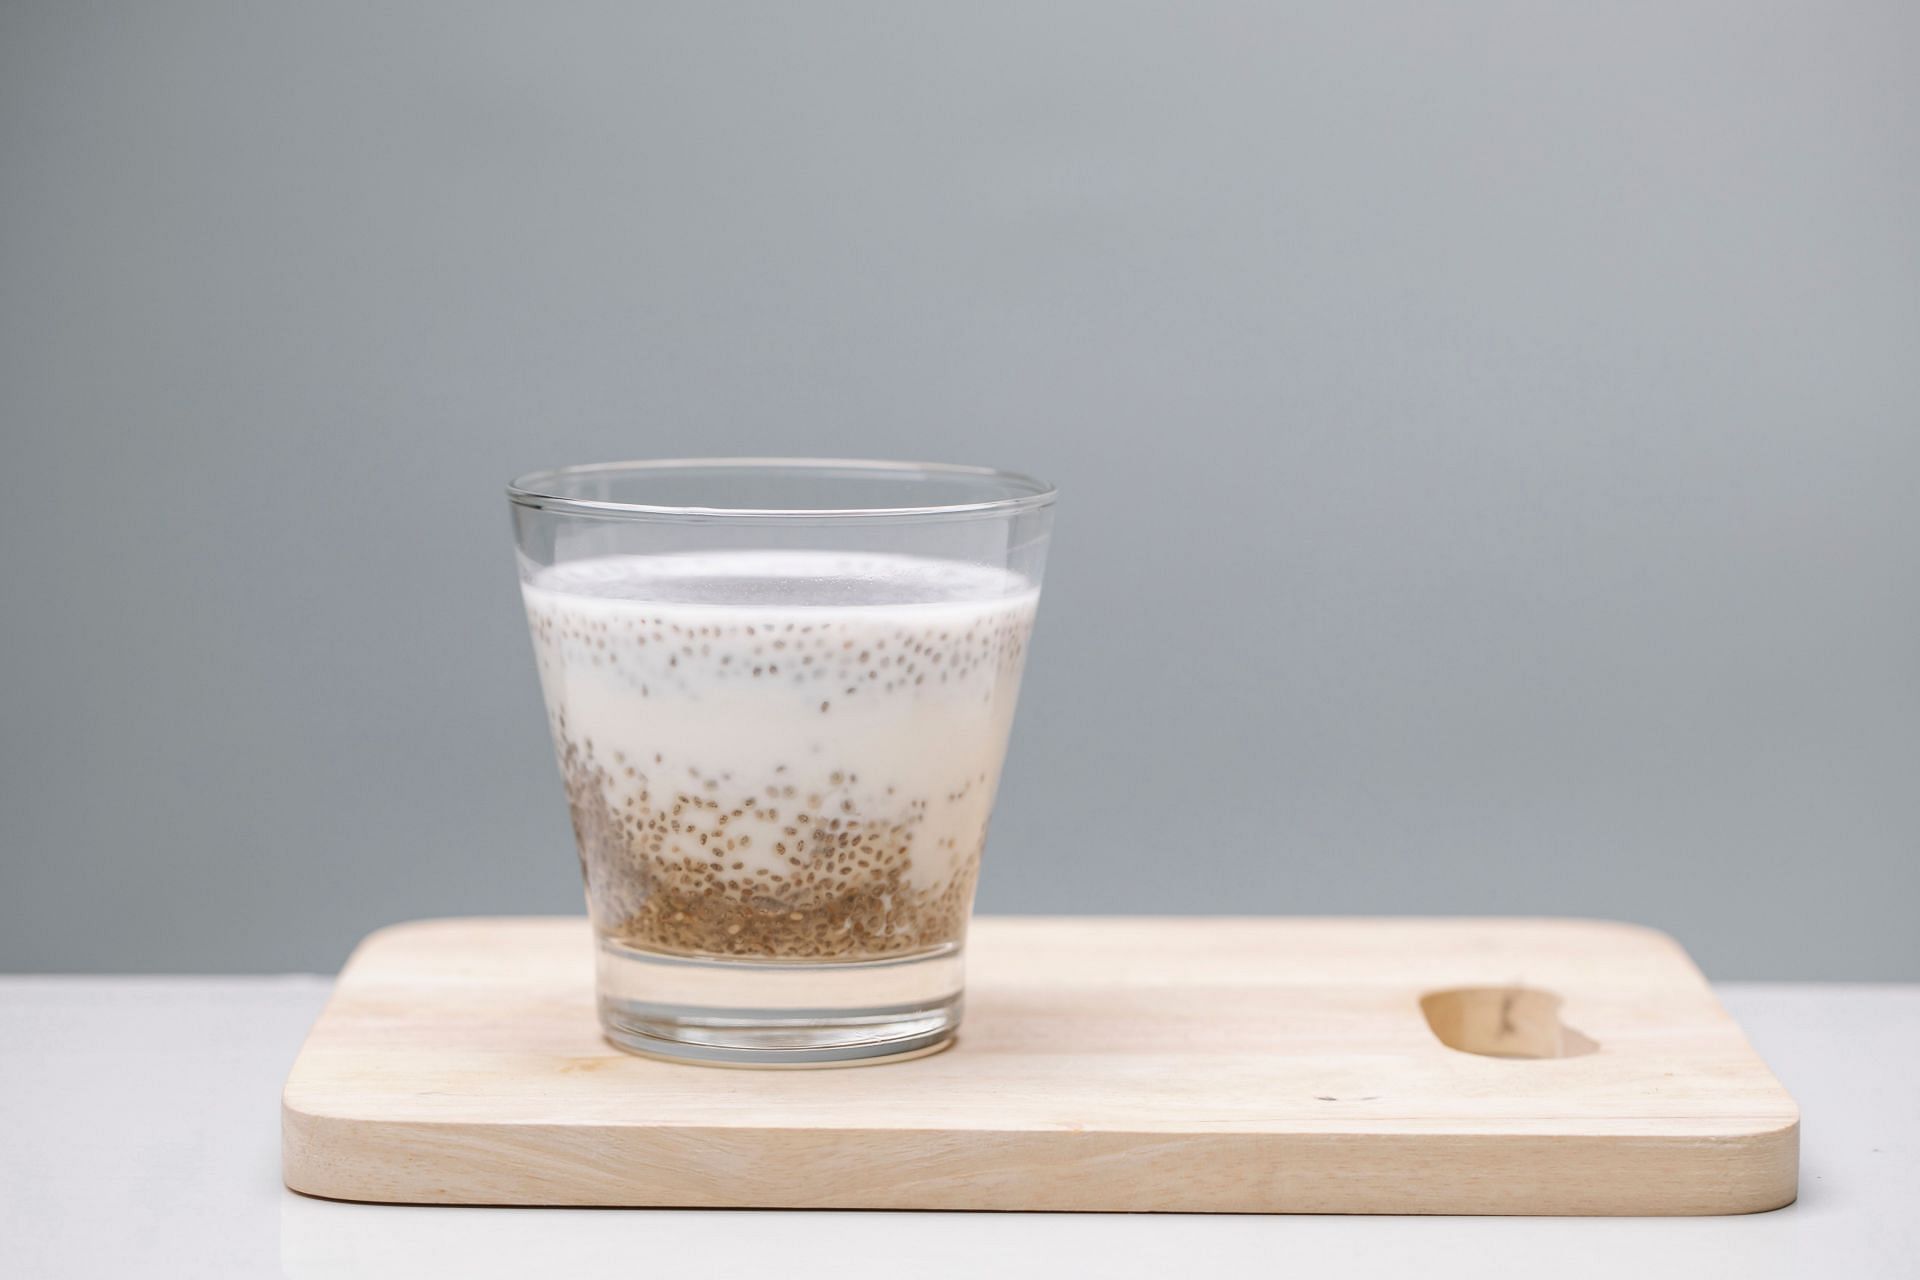 Are chia seeds good for you? Yes, they are! (Image via Pexels / Charlotte May)